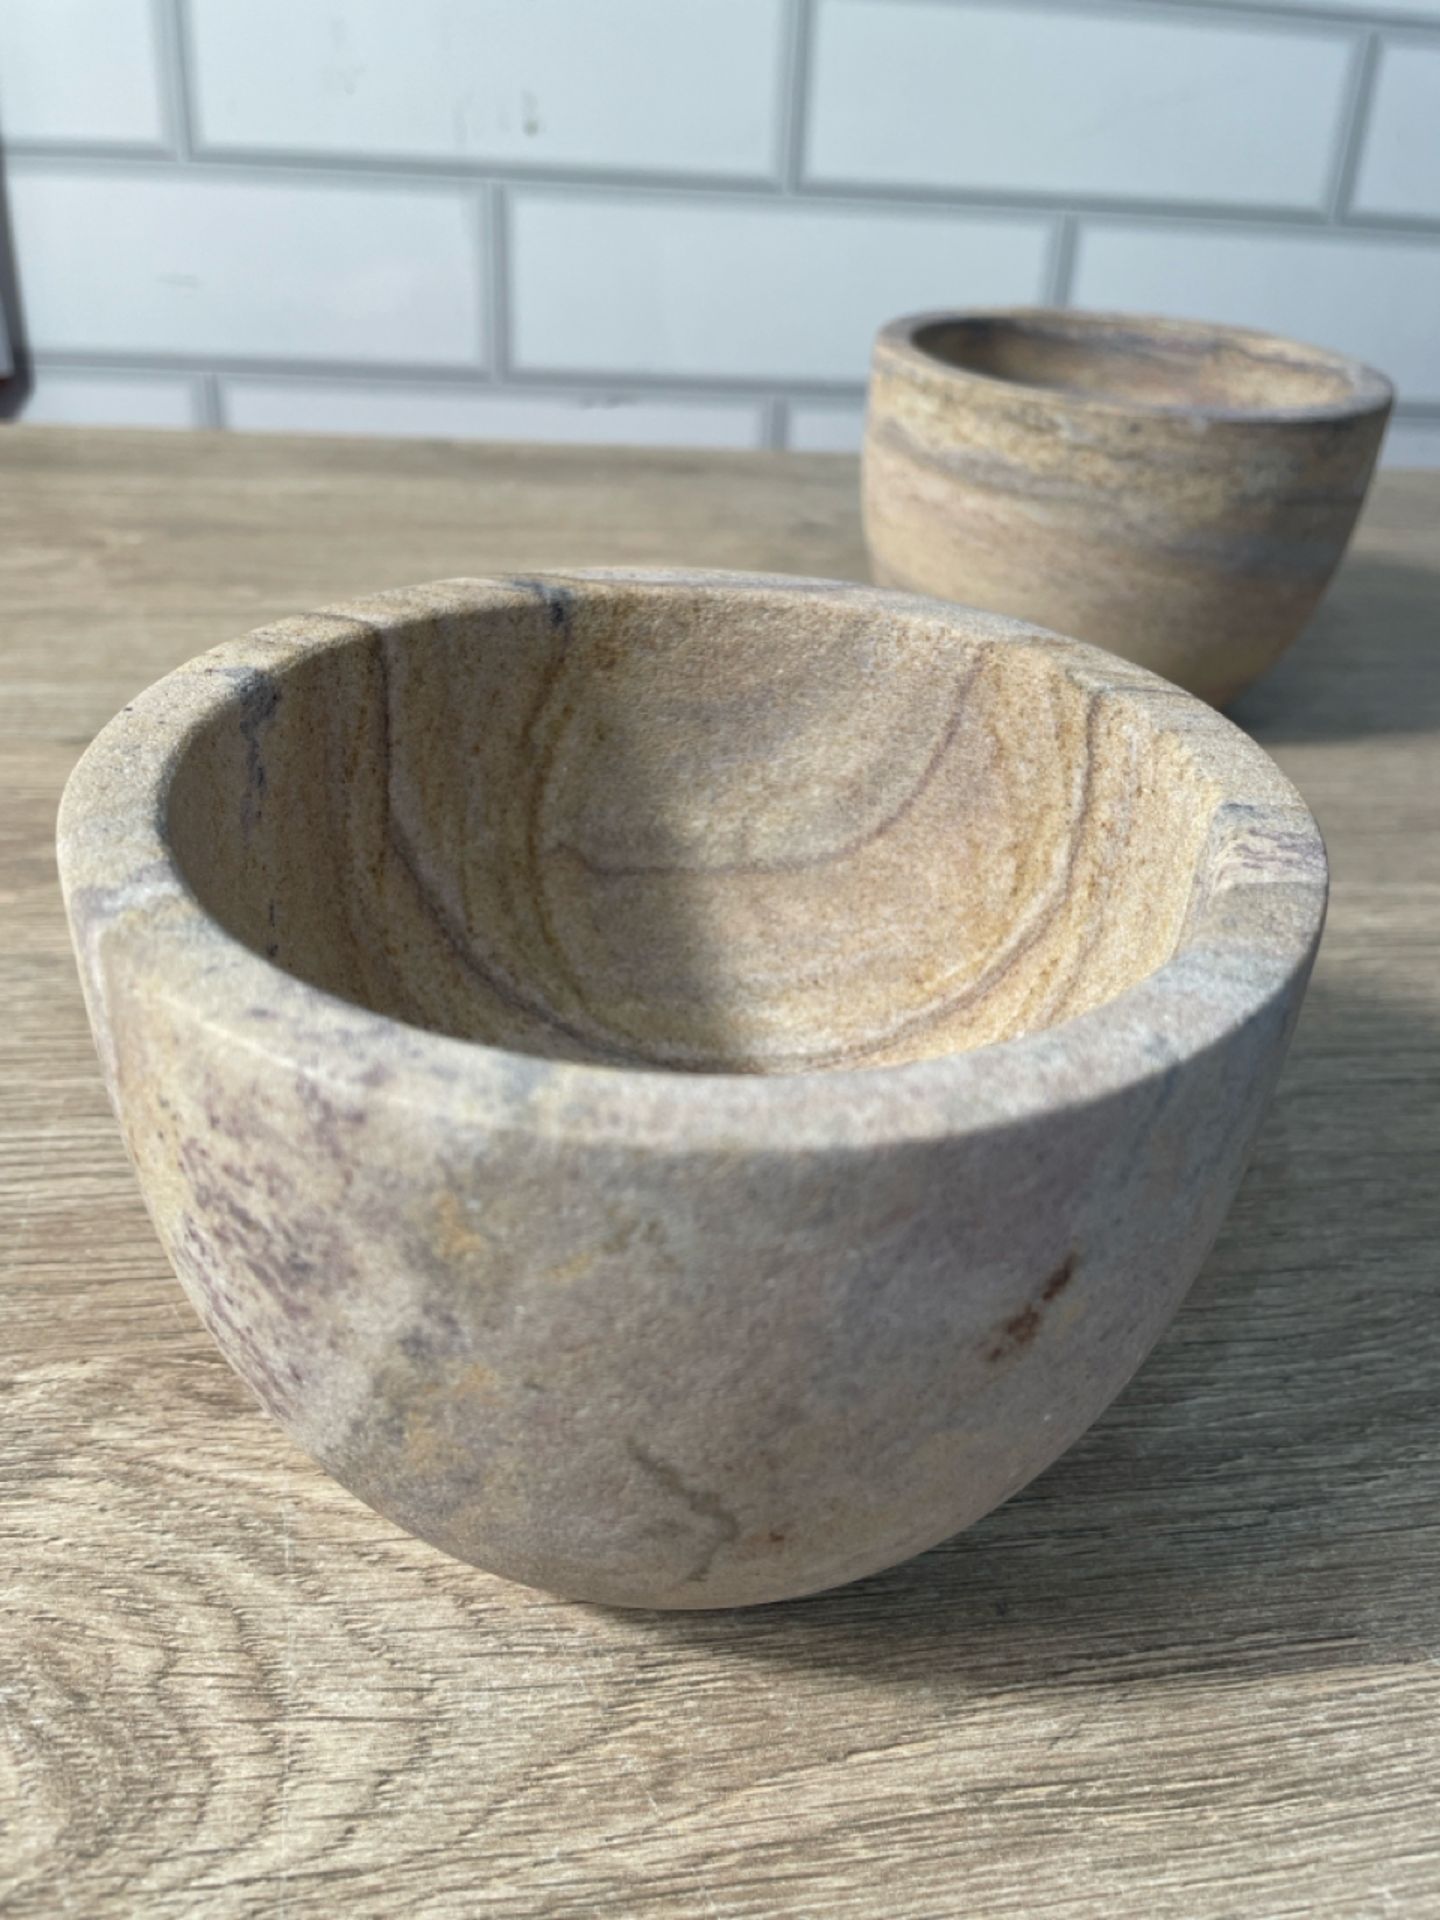 Small Untreated Stone Bowl x 2 - Image 2 of 3